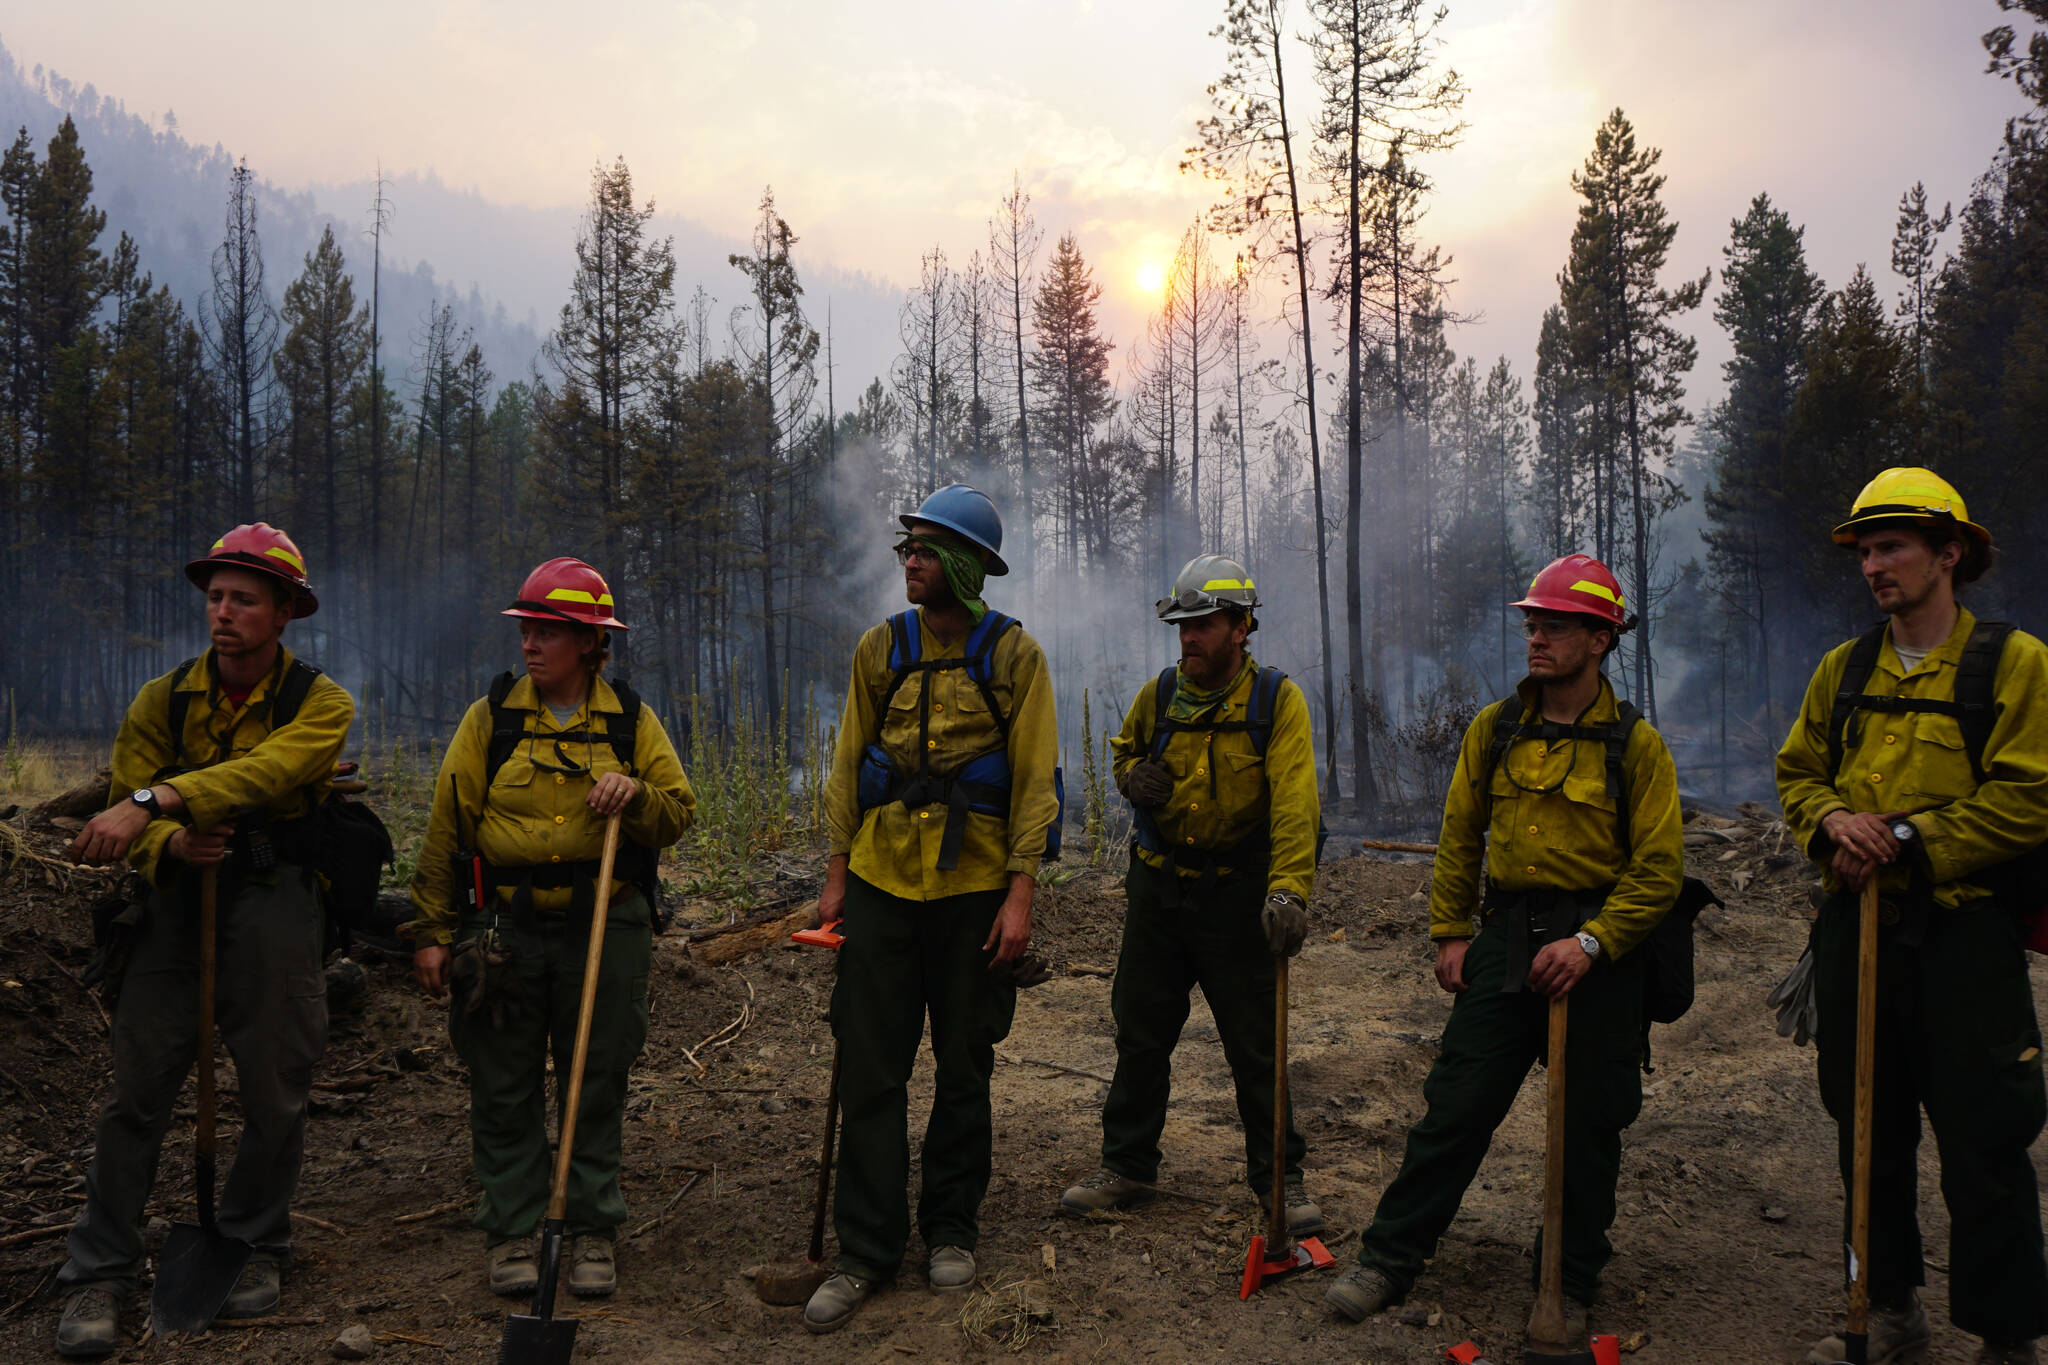 A Forest Service fire crew gets brief during an operation. Fire crews from Alaska are frequently deployed to the Lower 48 to help combat wildfires that are growing larger and closer to urban areas in many cases. (Courtesy photo / Parker Anders)